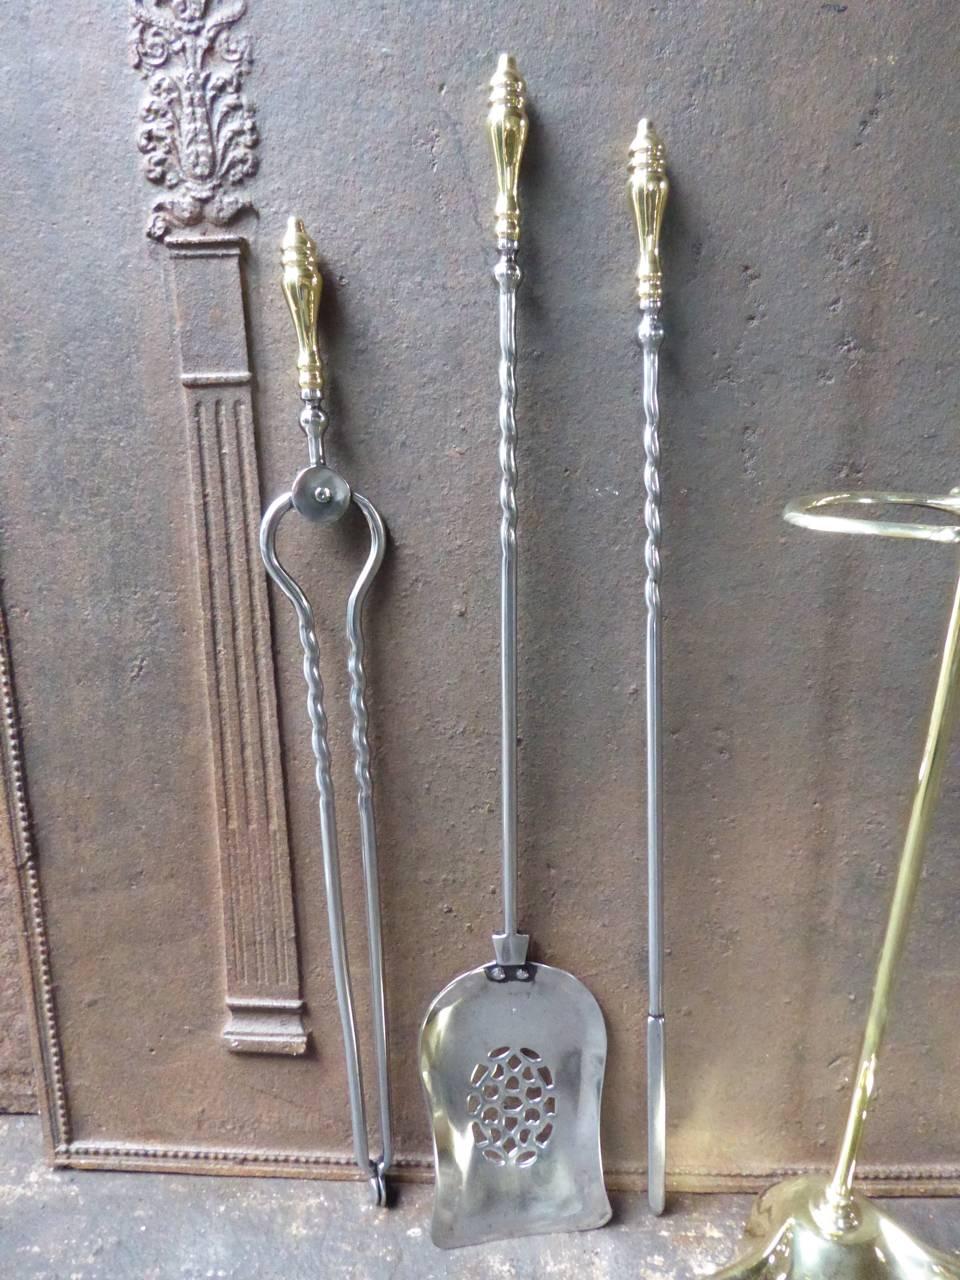 Polished 19th Century English Fire Tools - Fireplace Tools